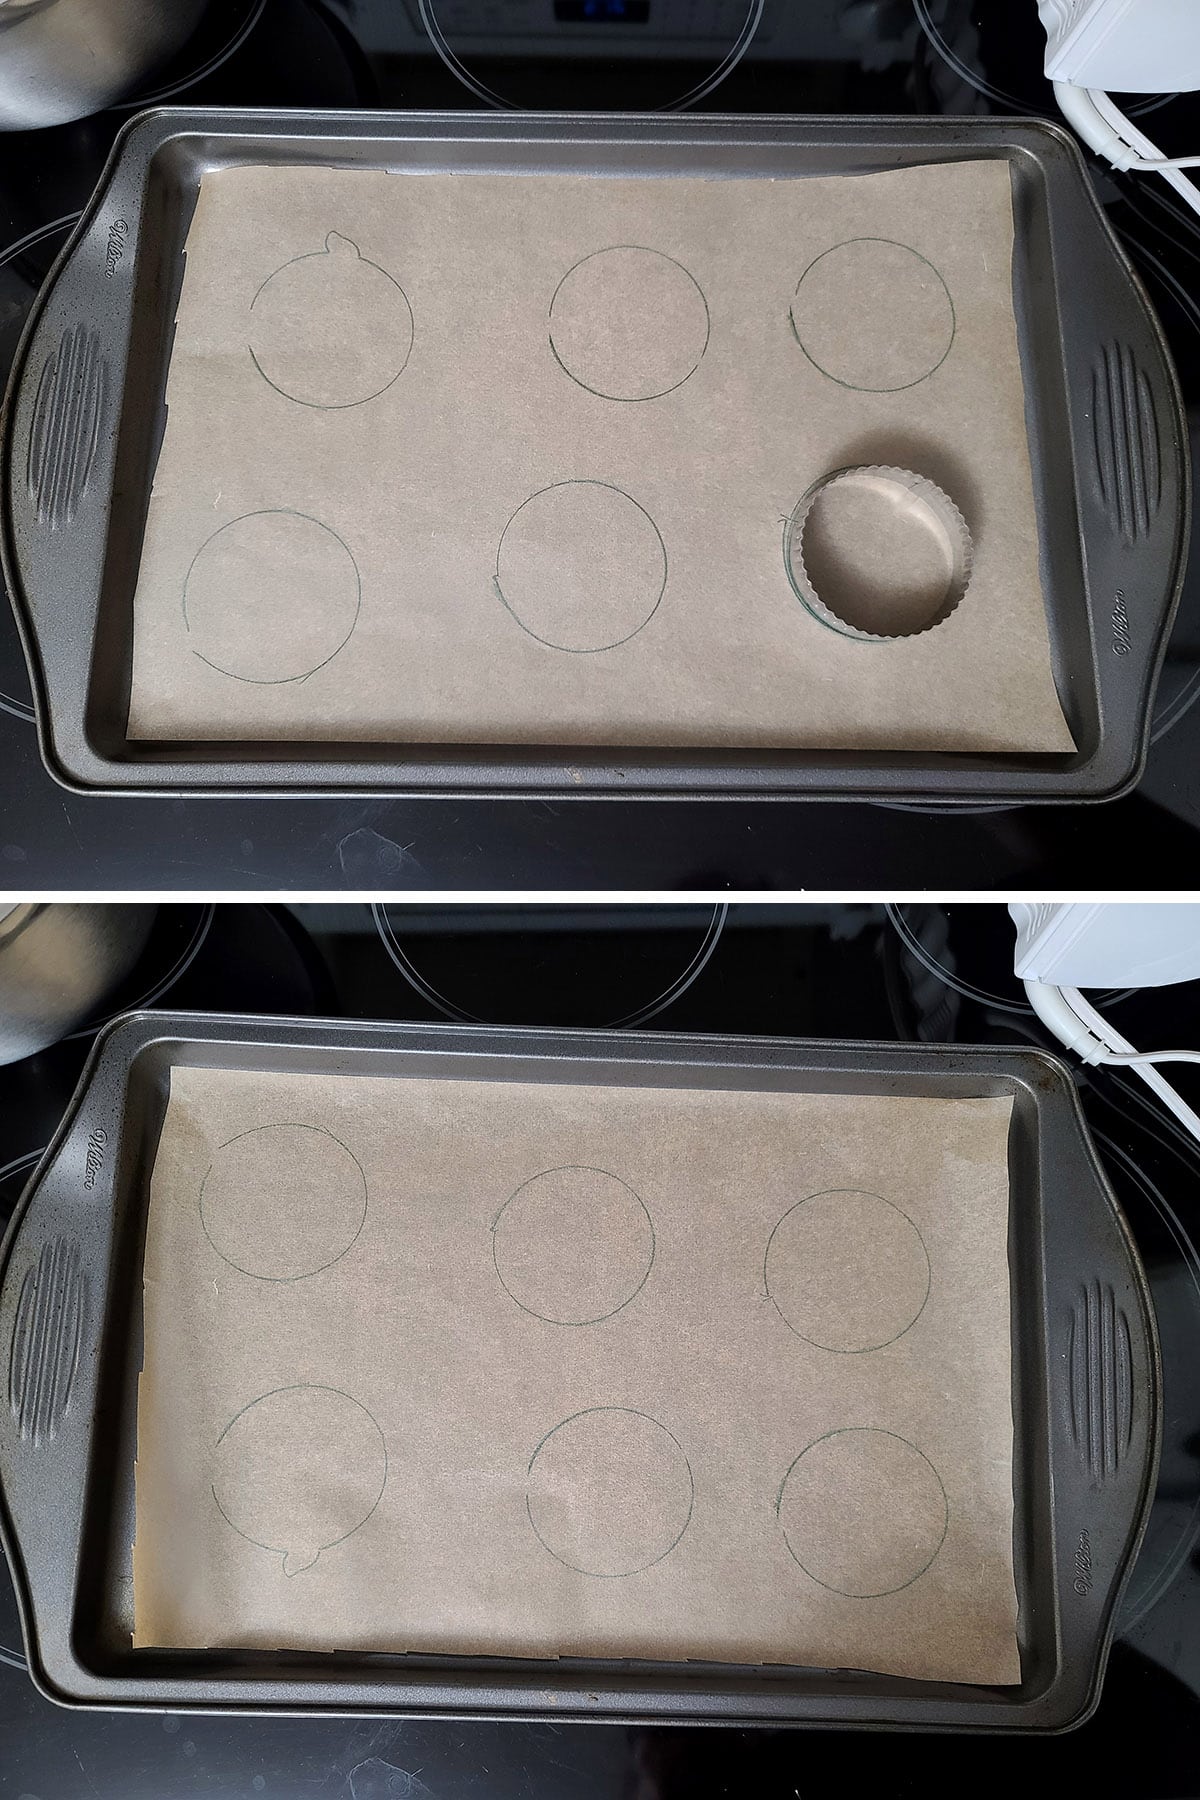 A 2 part image showing a parchment lined baking sheet with circles being drawn on the parchment, then the parchment flipped over on the pan.